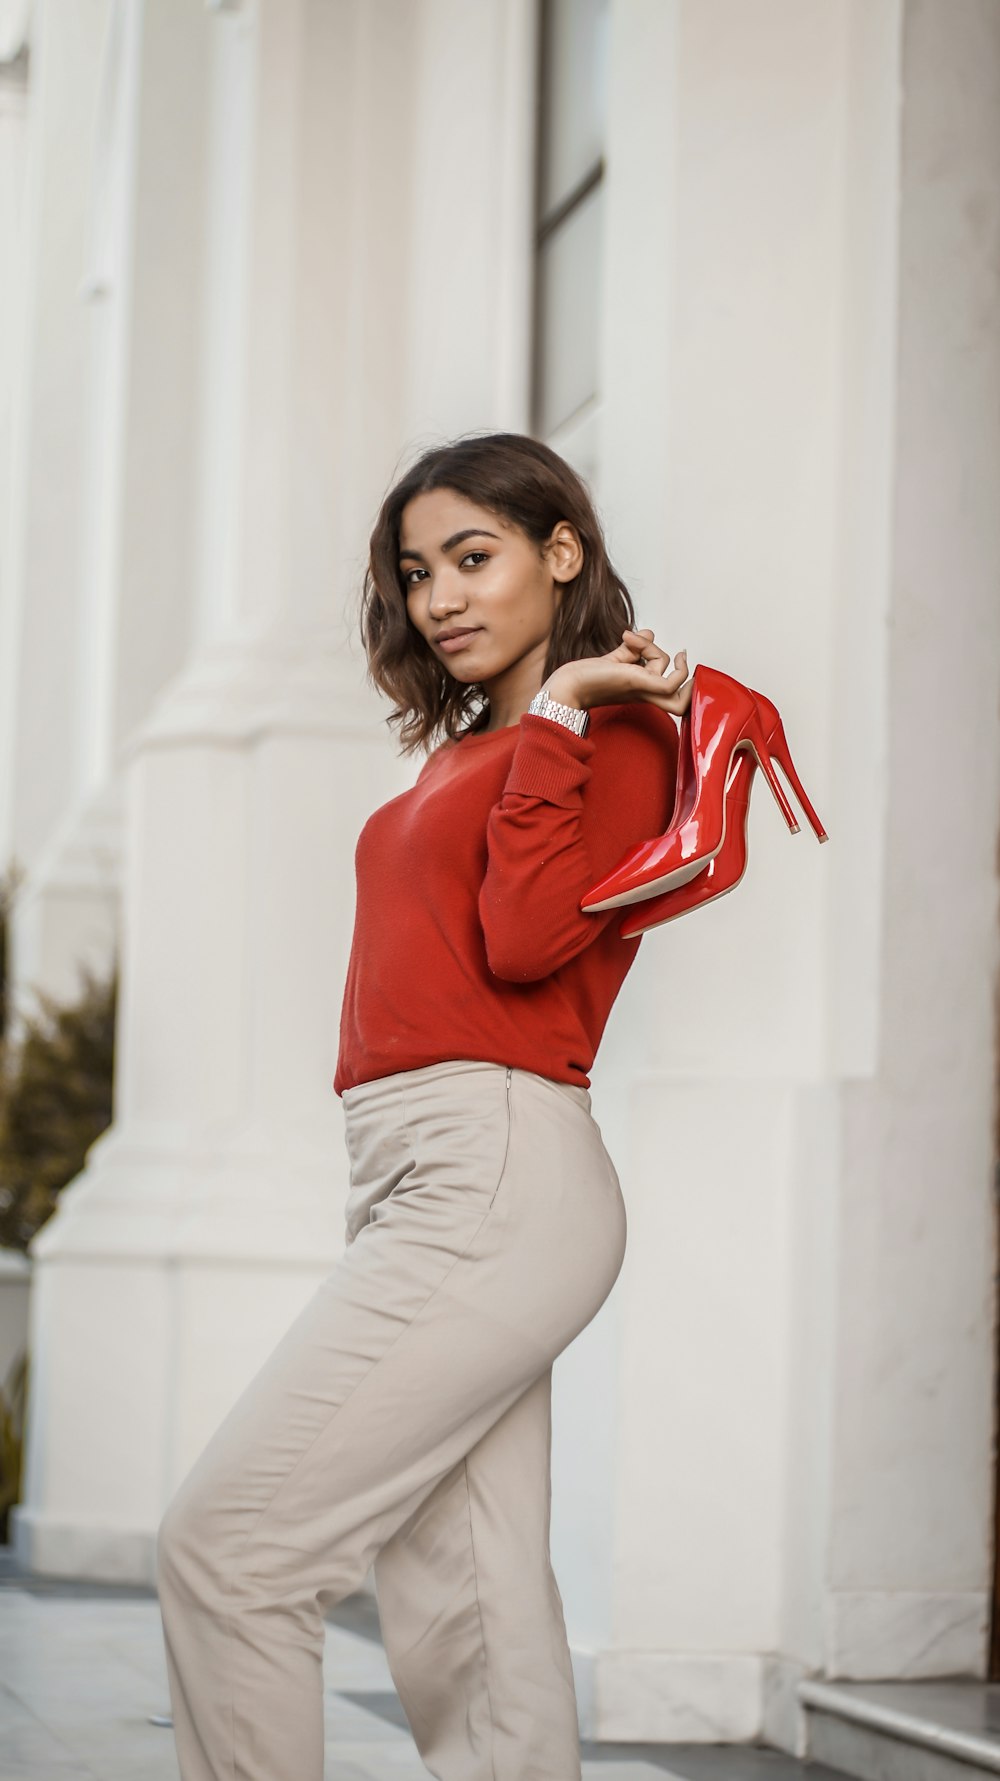 Woman in red long sleeve shirt and white pants holding red leather handbag  photo – Free Dominican republic Image on Unsplash